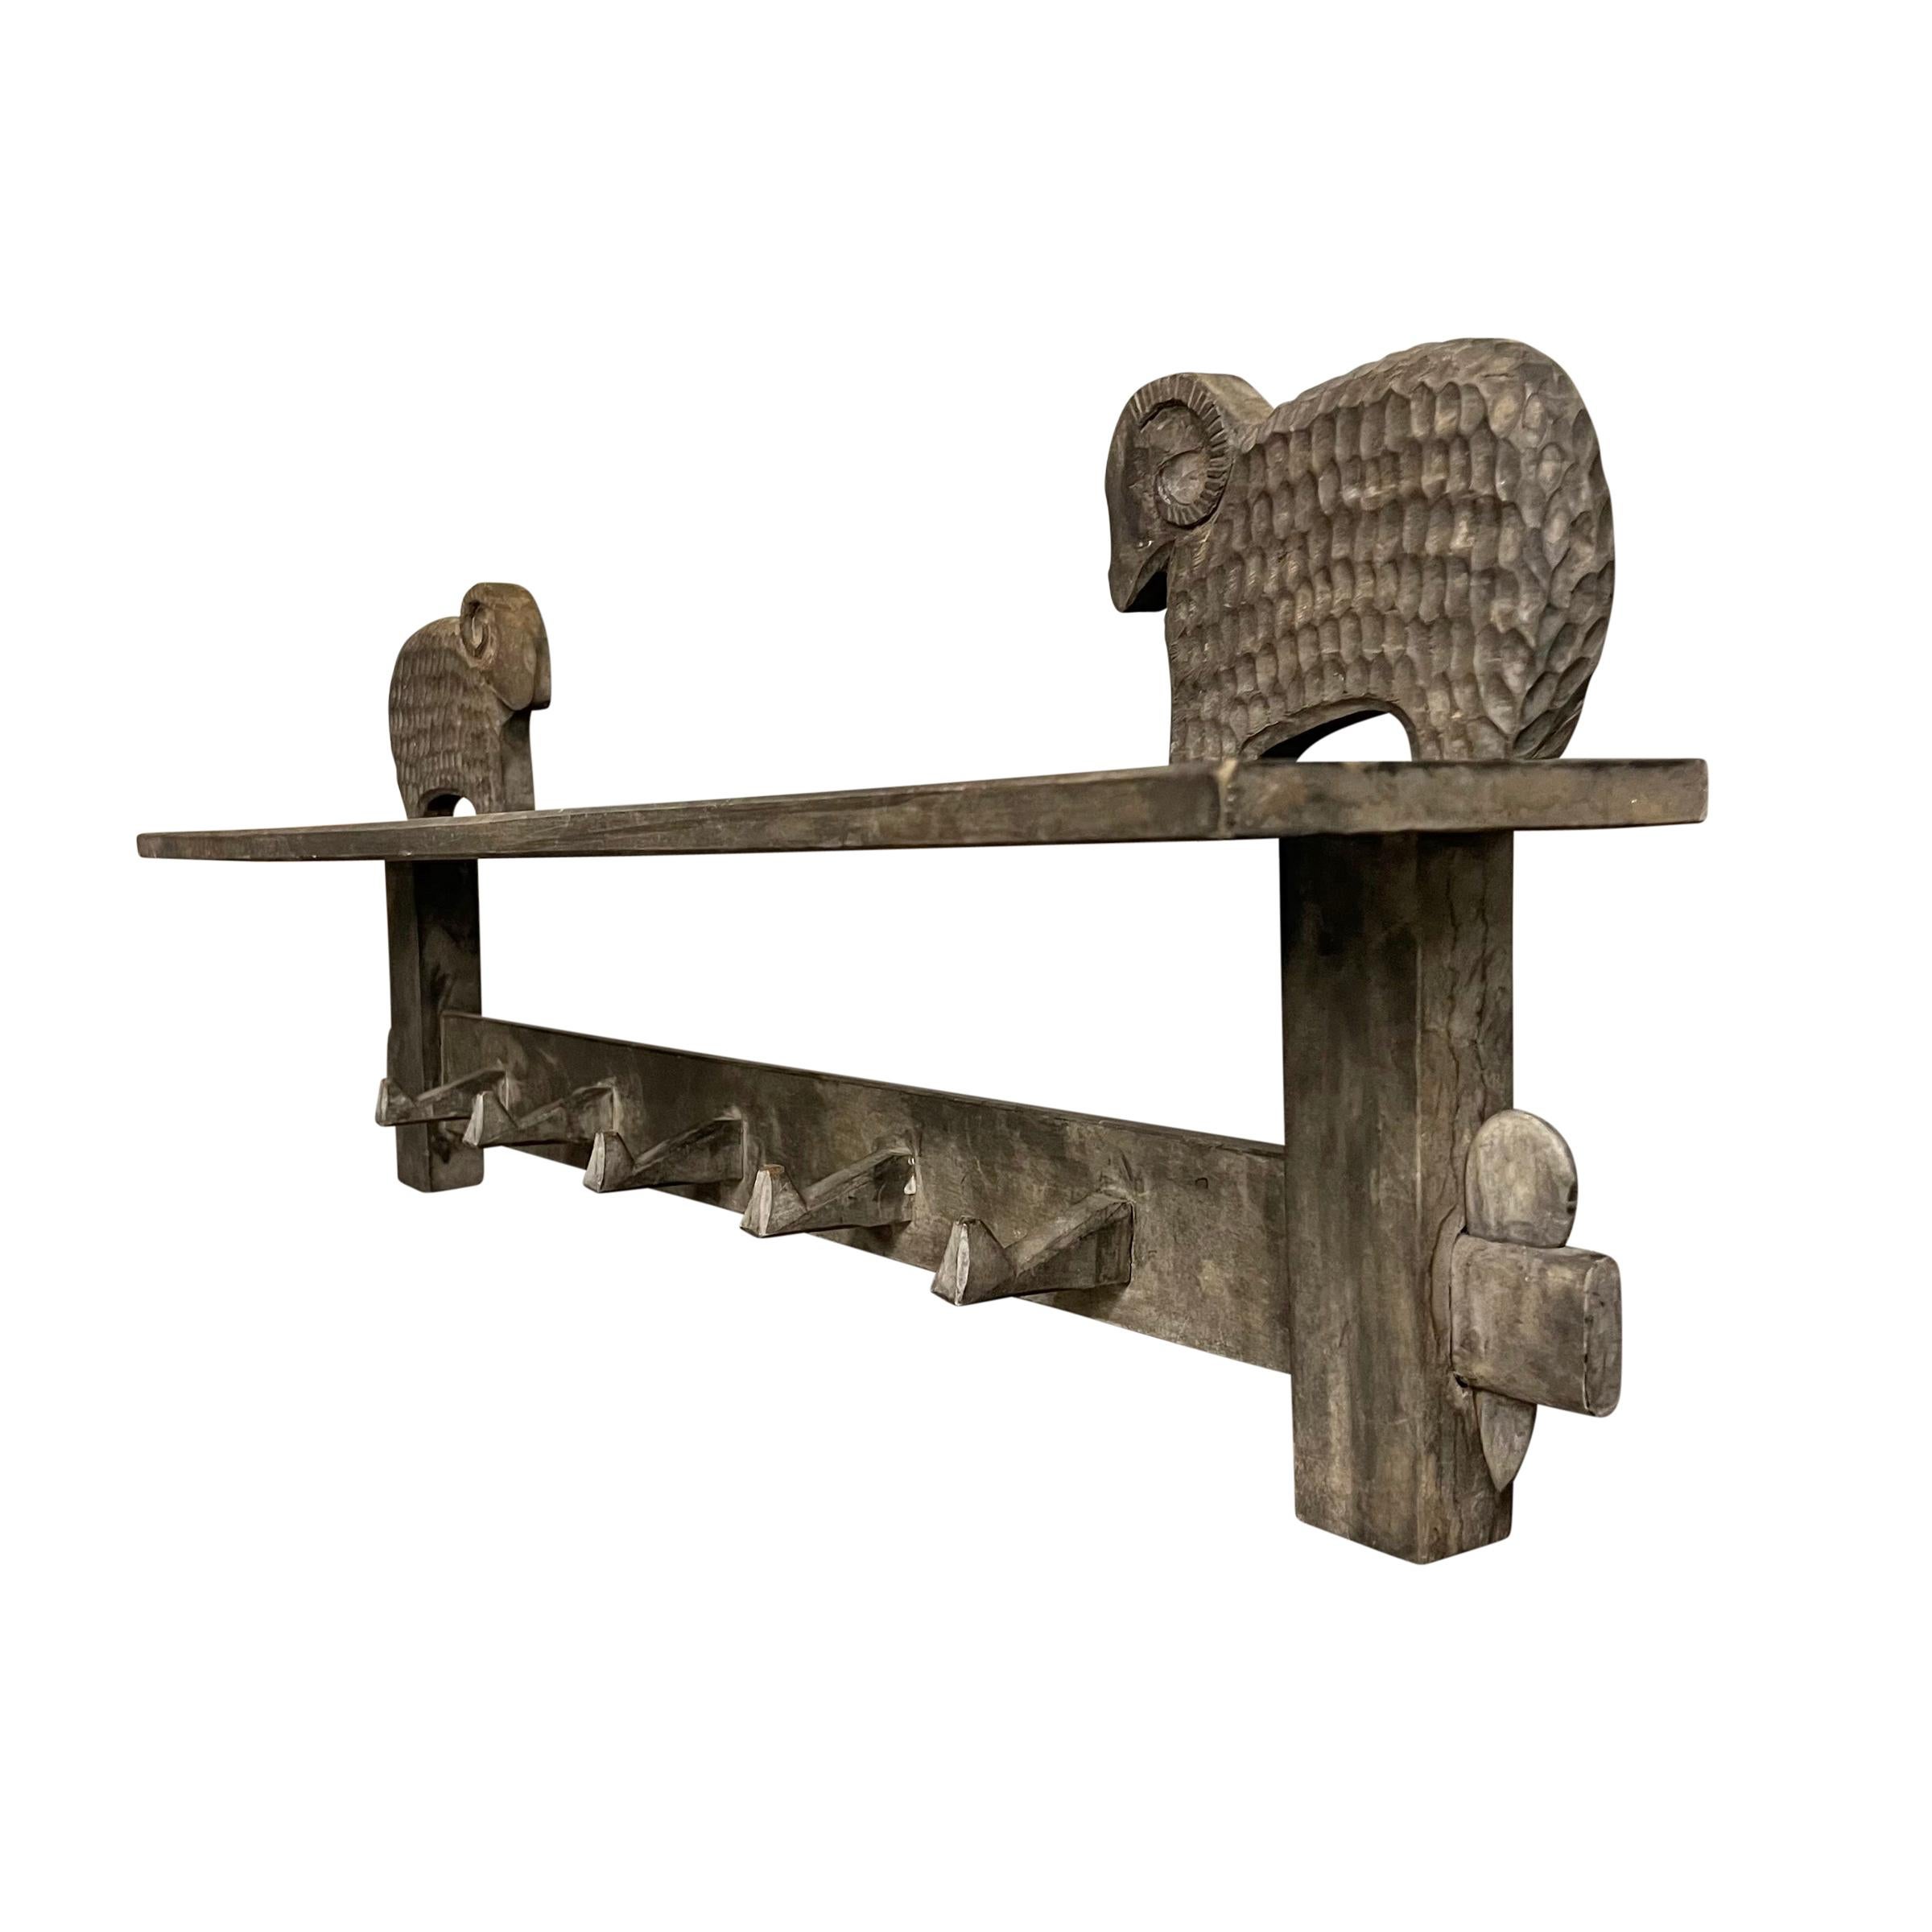 Mid-20th Century 1950s French Modernist Wall Shelf and Coat Rack with Rams For Sale